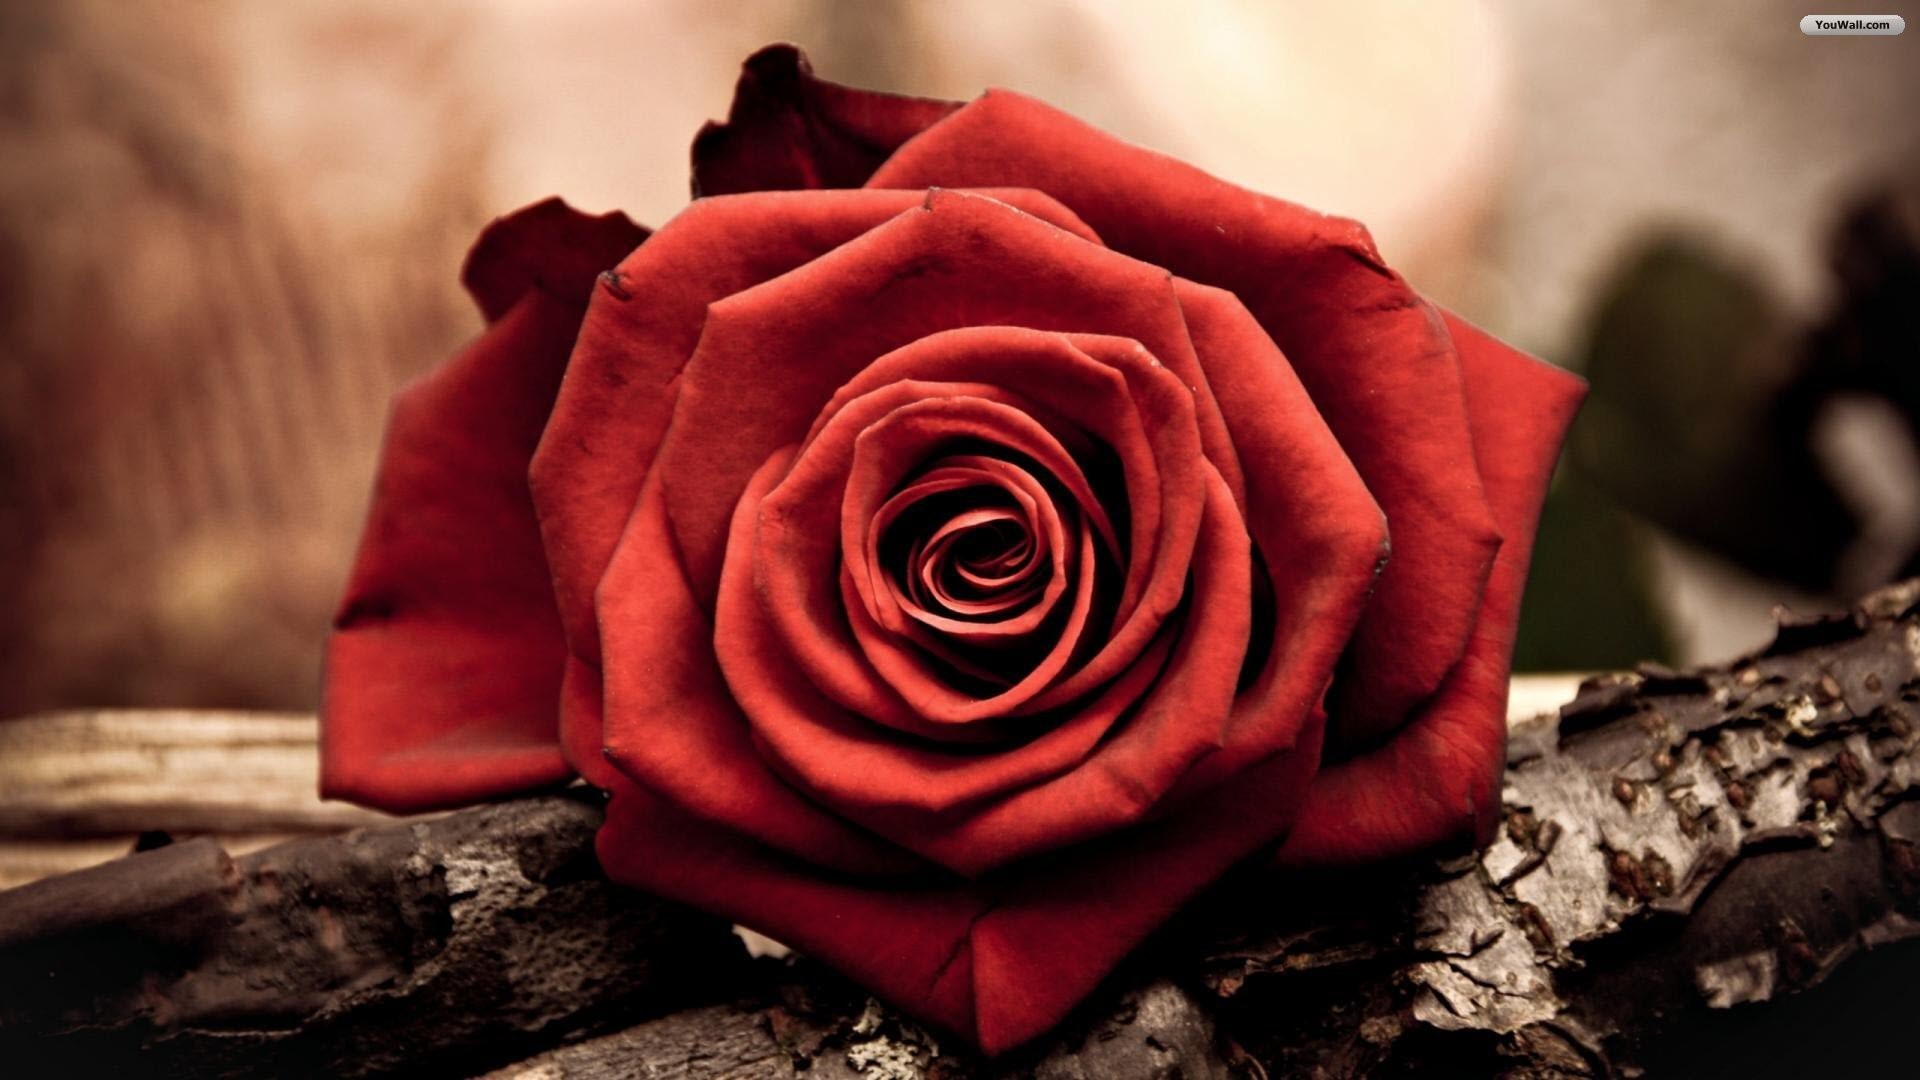 1920x1080 Youwall Red Rose Wallpaper Wallpapers Free